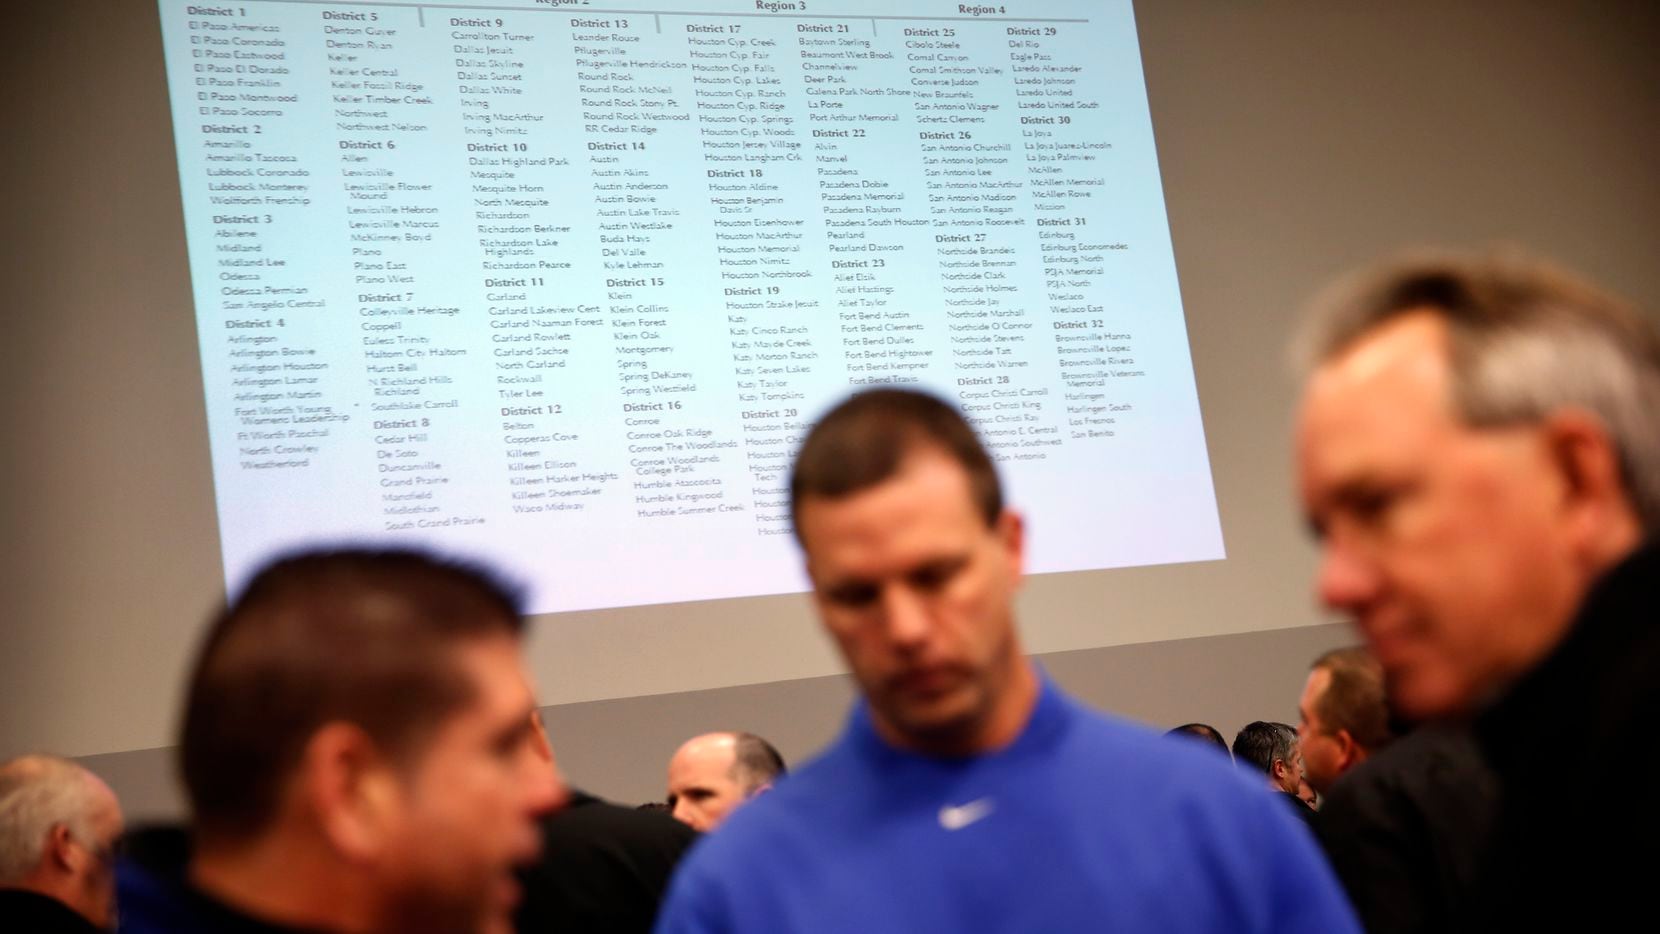 Dallas-area football coaches and athletic directors gathered to view the new UIL realignment...